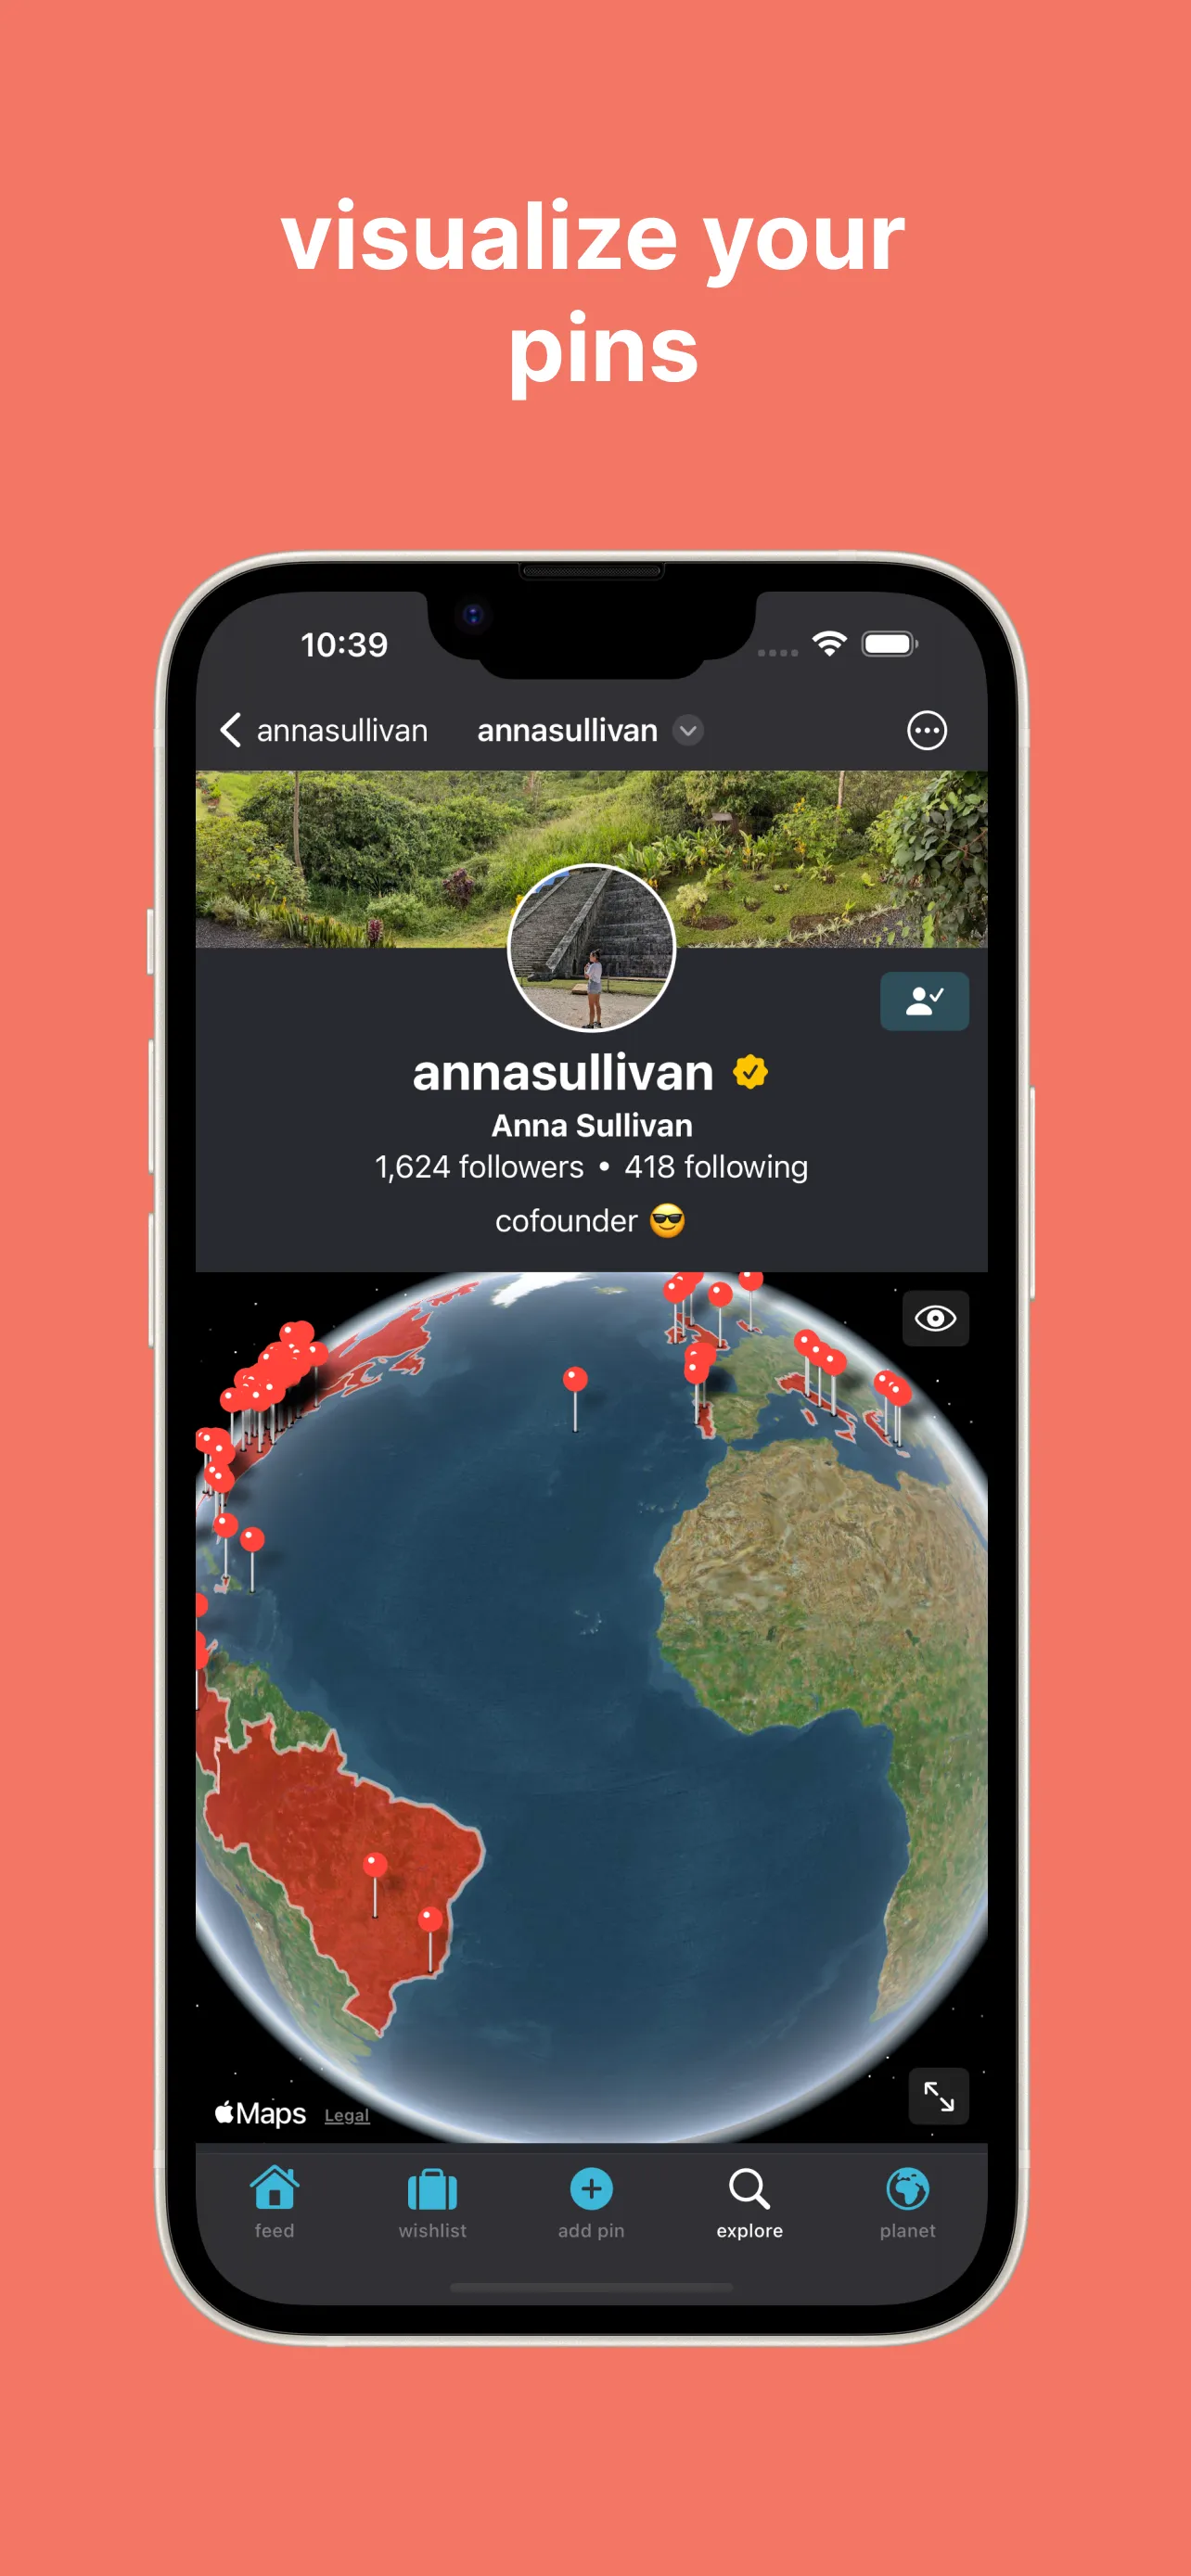 View your pins; A user profile on pinplanet. 3D globe or 2d map with pins to track places you've visited.